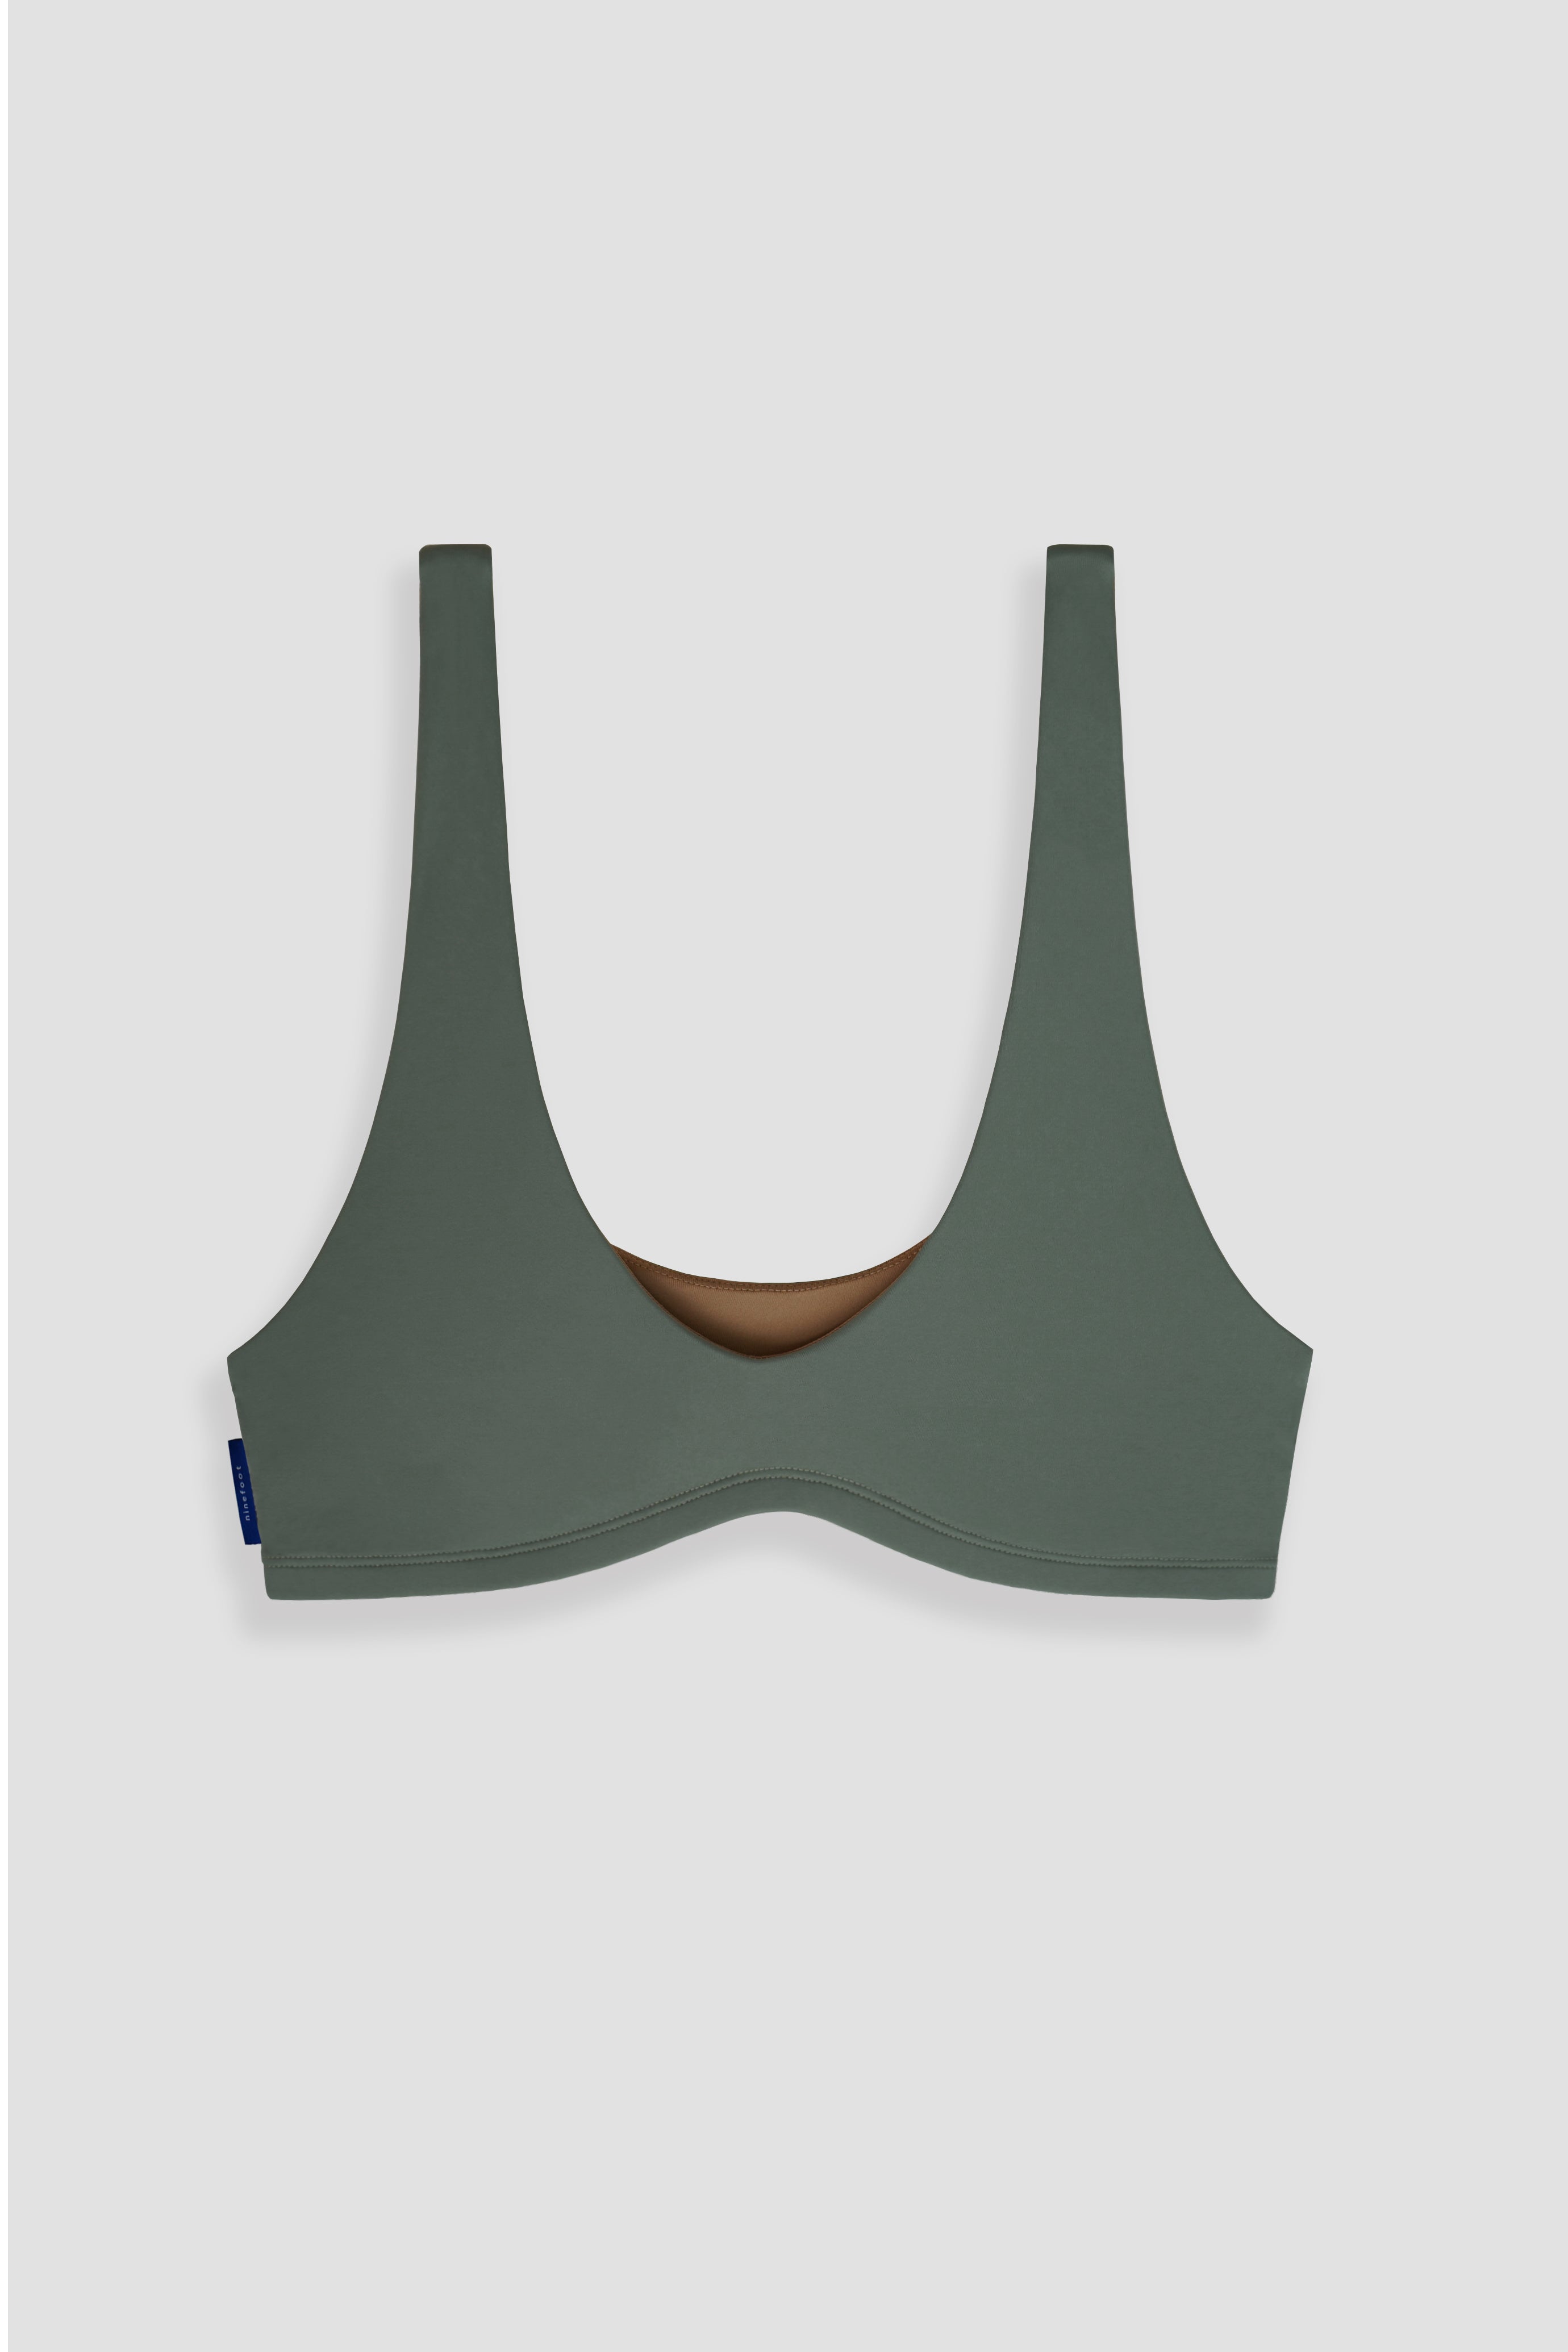 Nias Top in Army Green